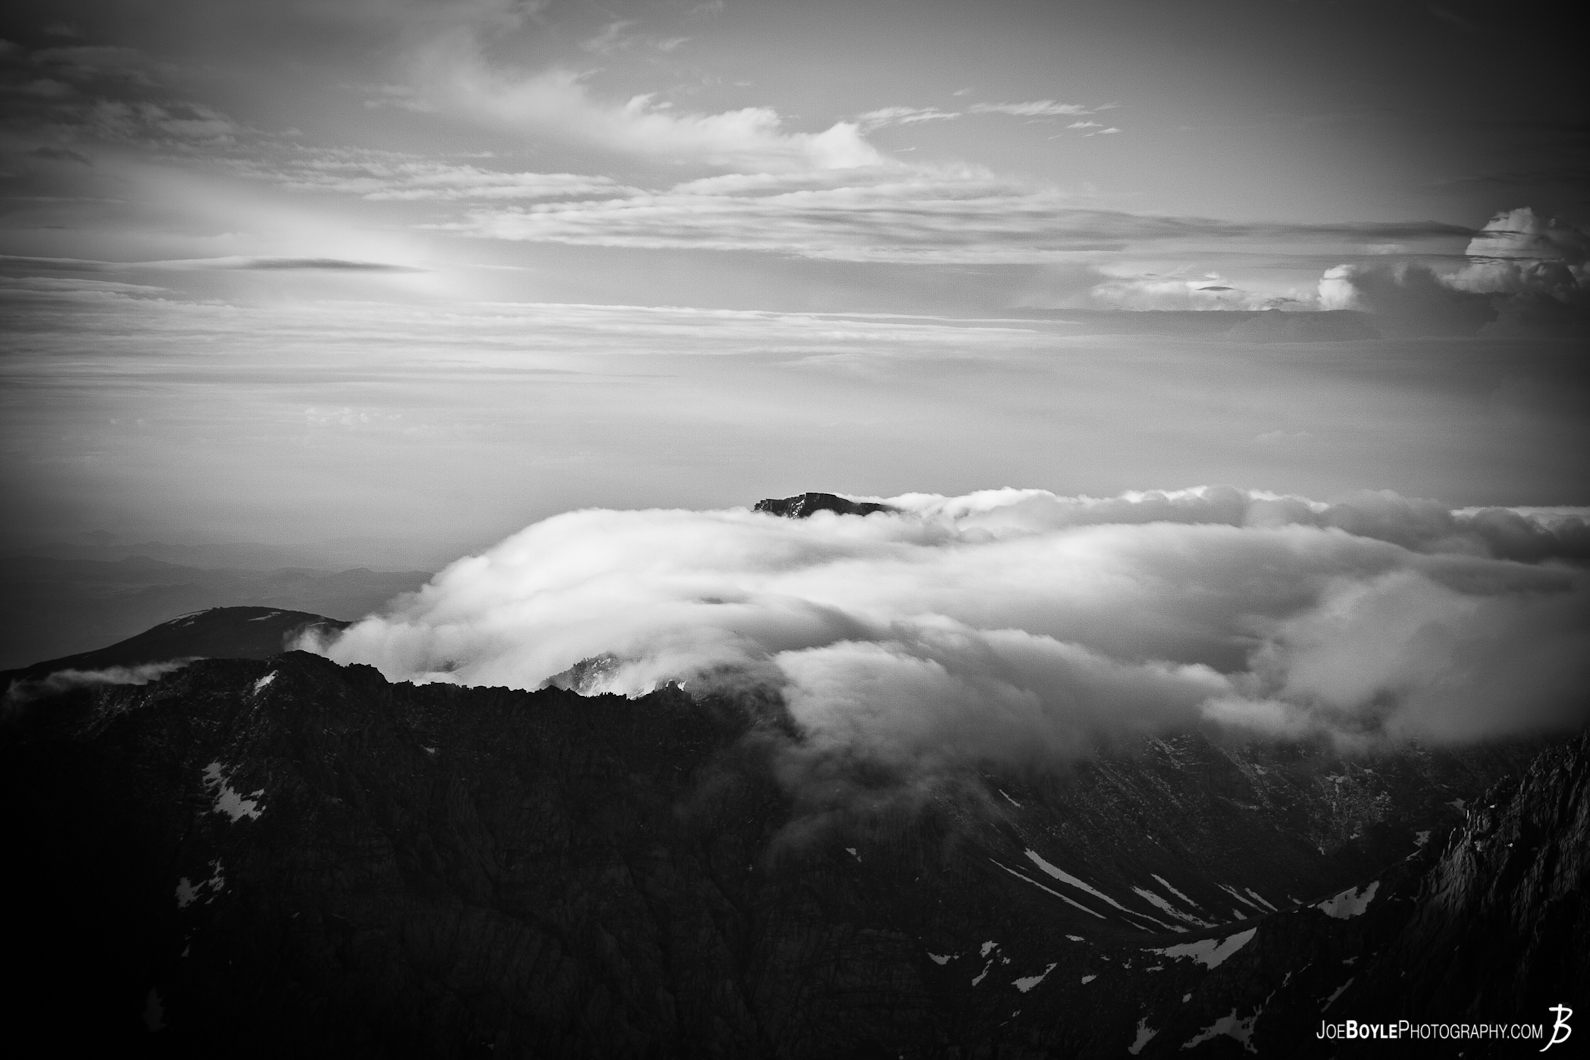  This photo is from the summit of Mt. Whitney located in the Sierra Nevada mountain range. While at the top I was fortunate enough to see these these clouds "sinking" past a mountain peak. 